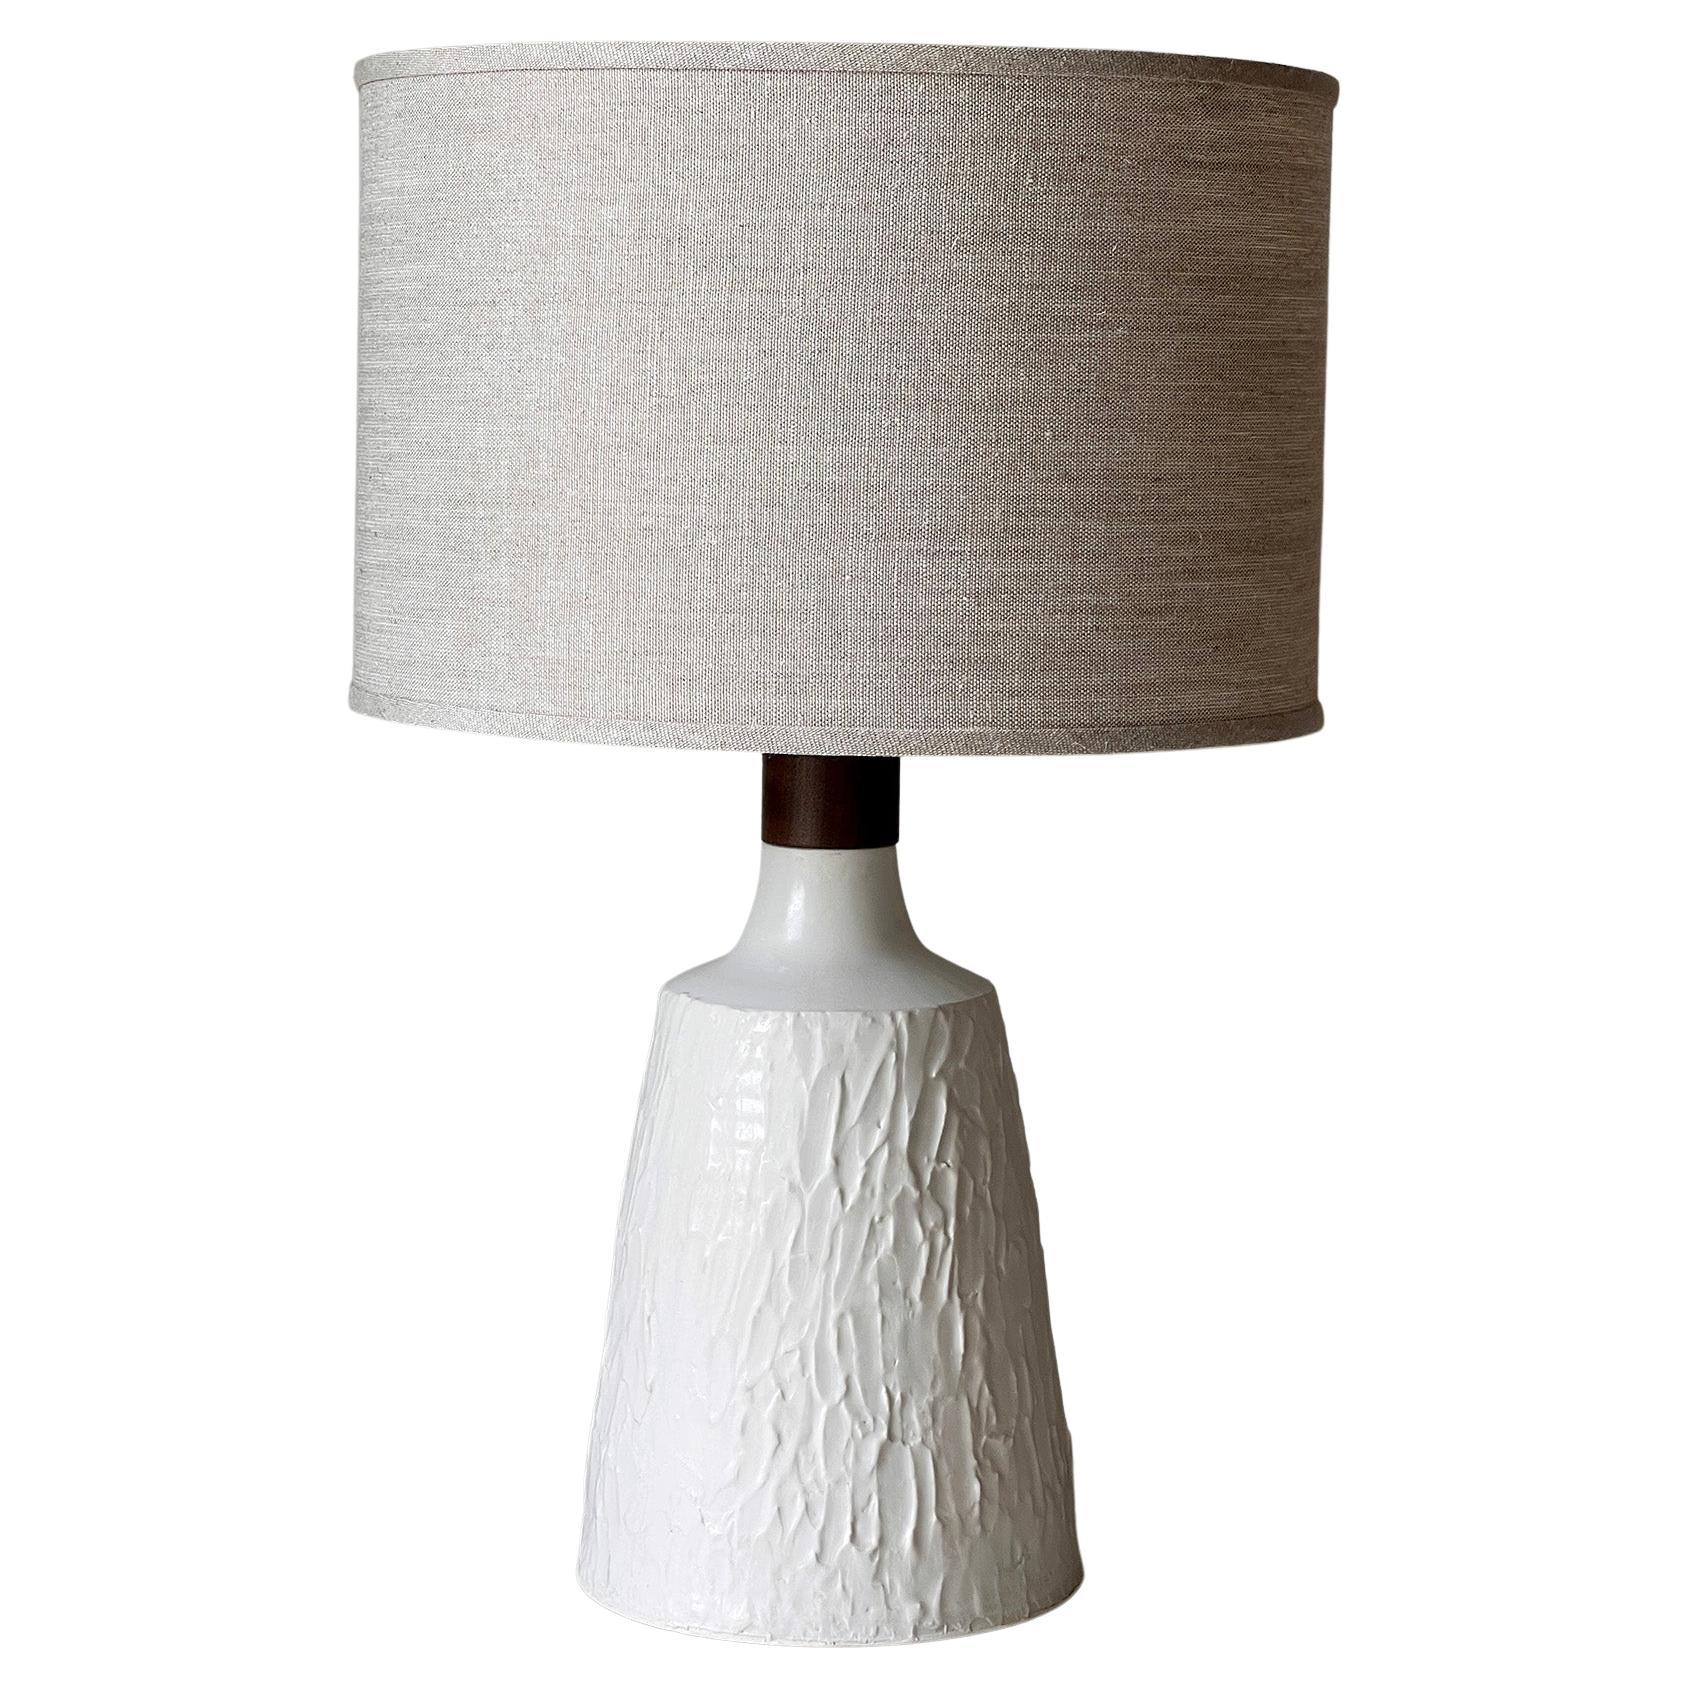 One of a Kind Handmade Textured Porcelain and Walnut Table Lamp For Sale